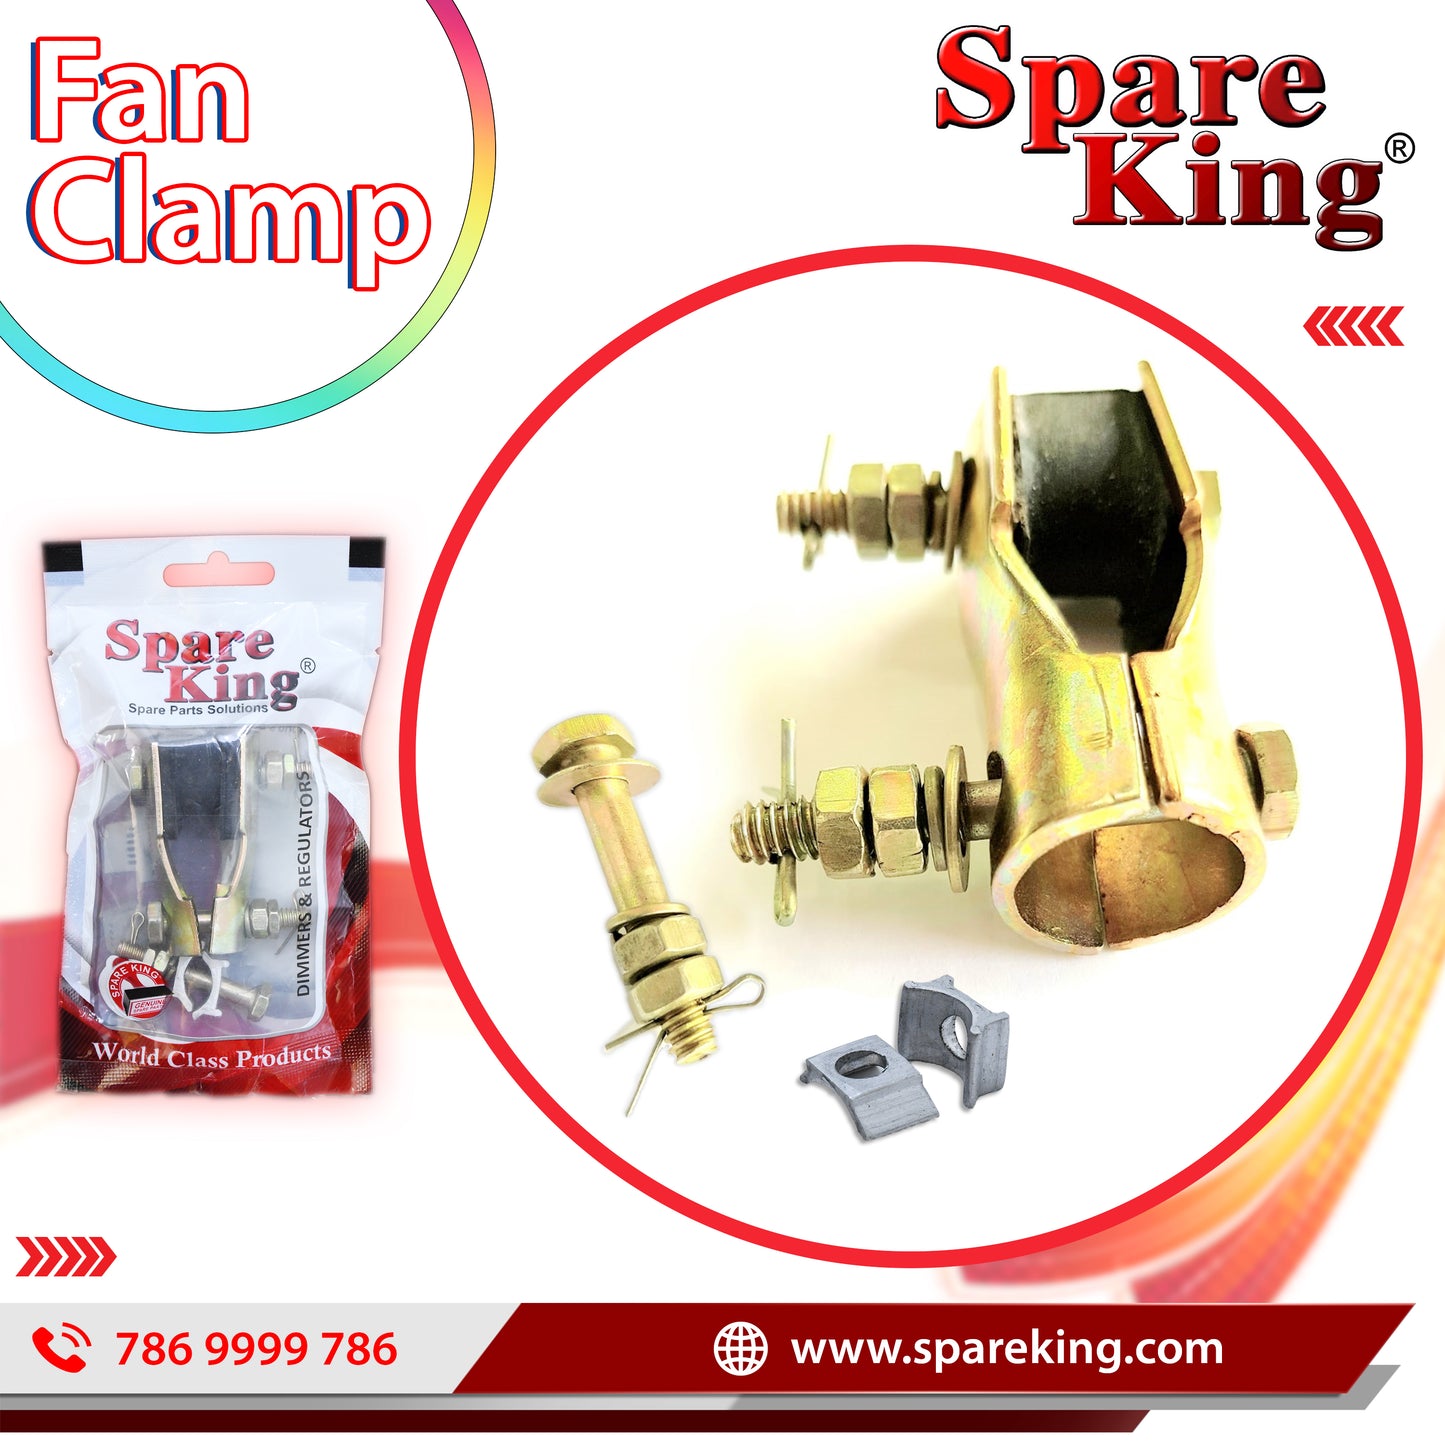 Spare King Fan Clamp